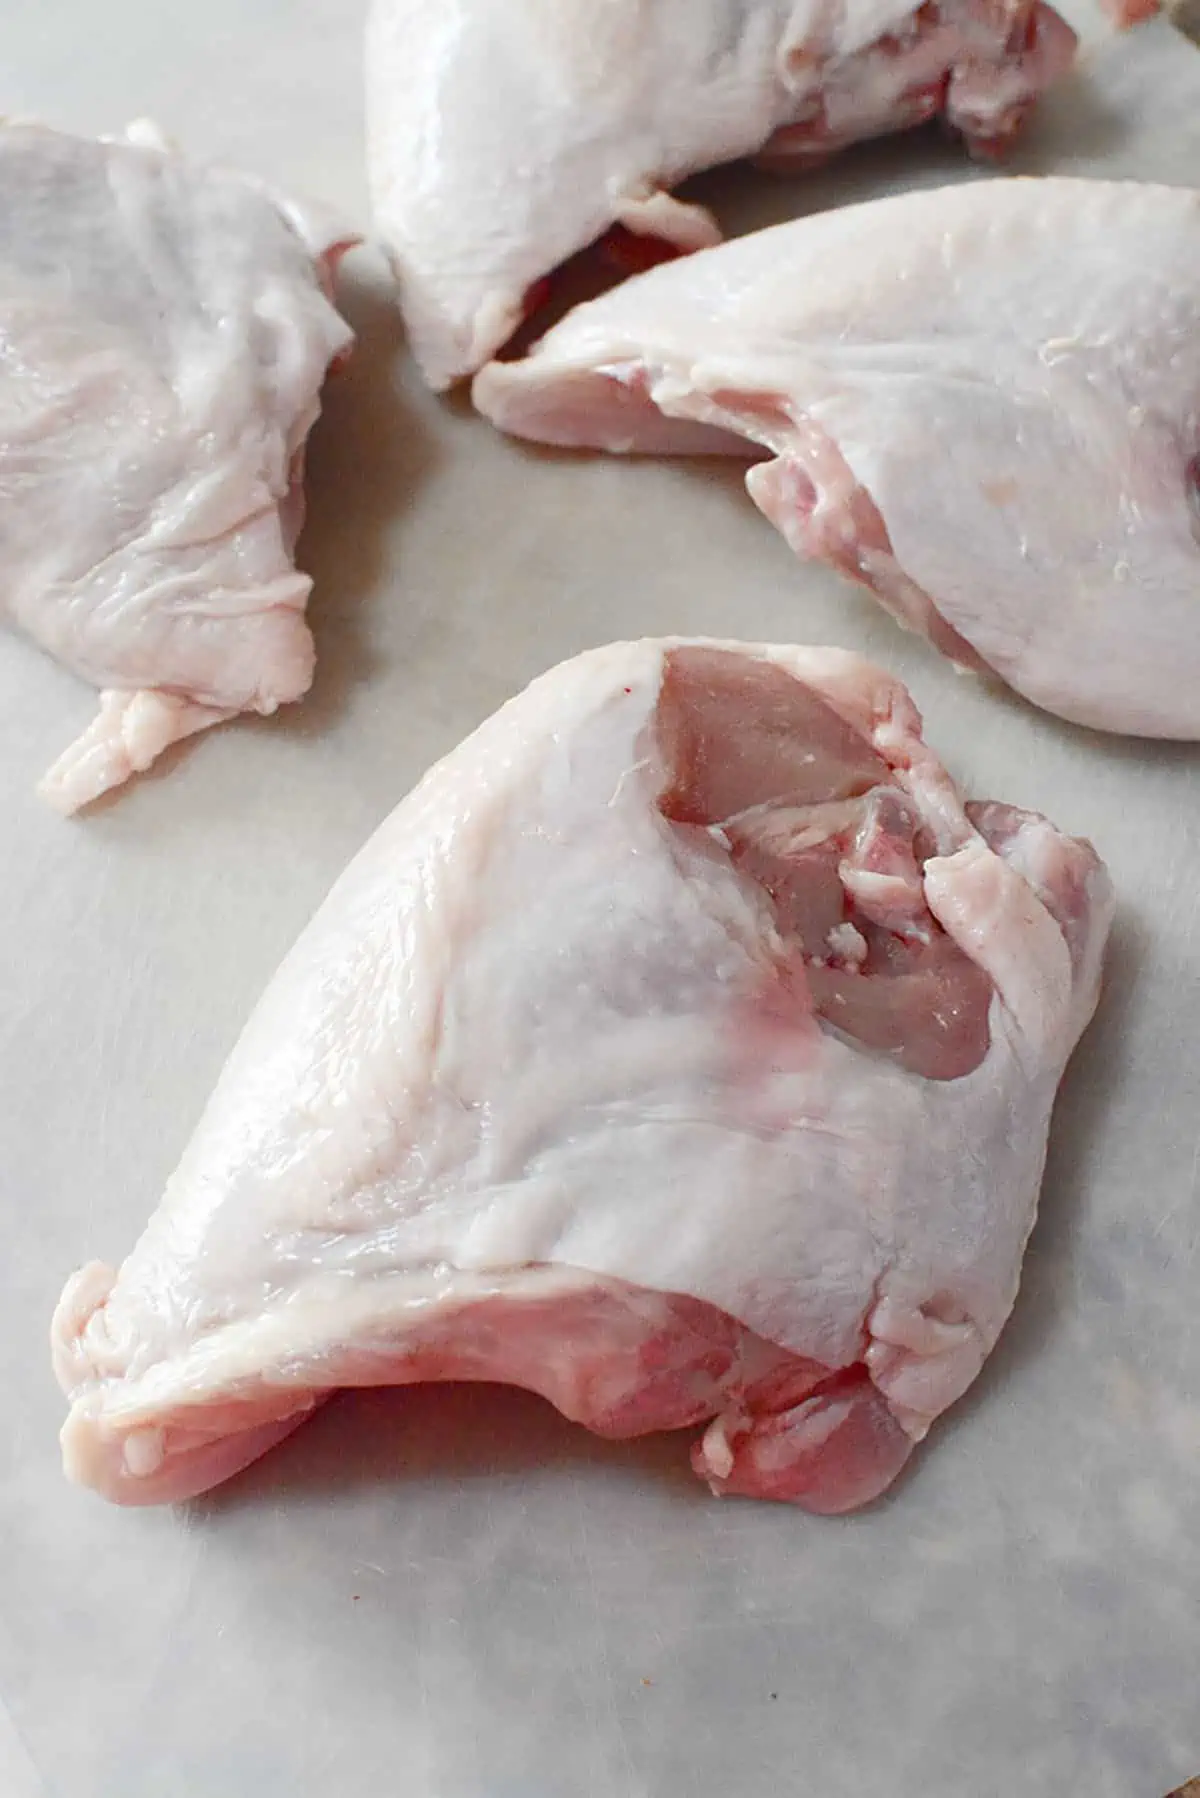 3 raw bone in chicken breasts with the skin still attached on a white plastic cutting board.